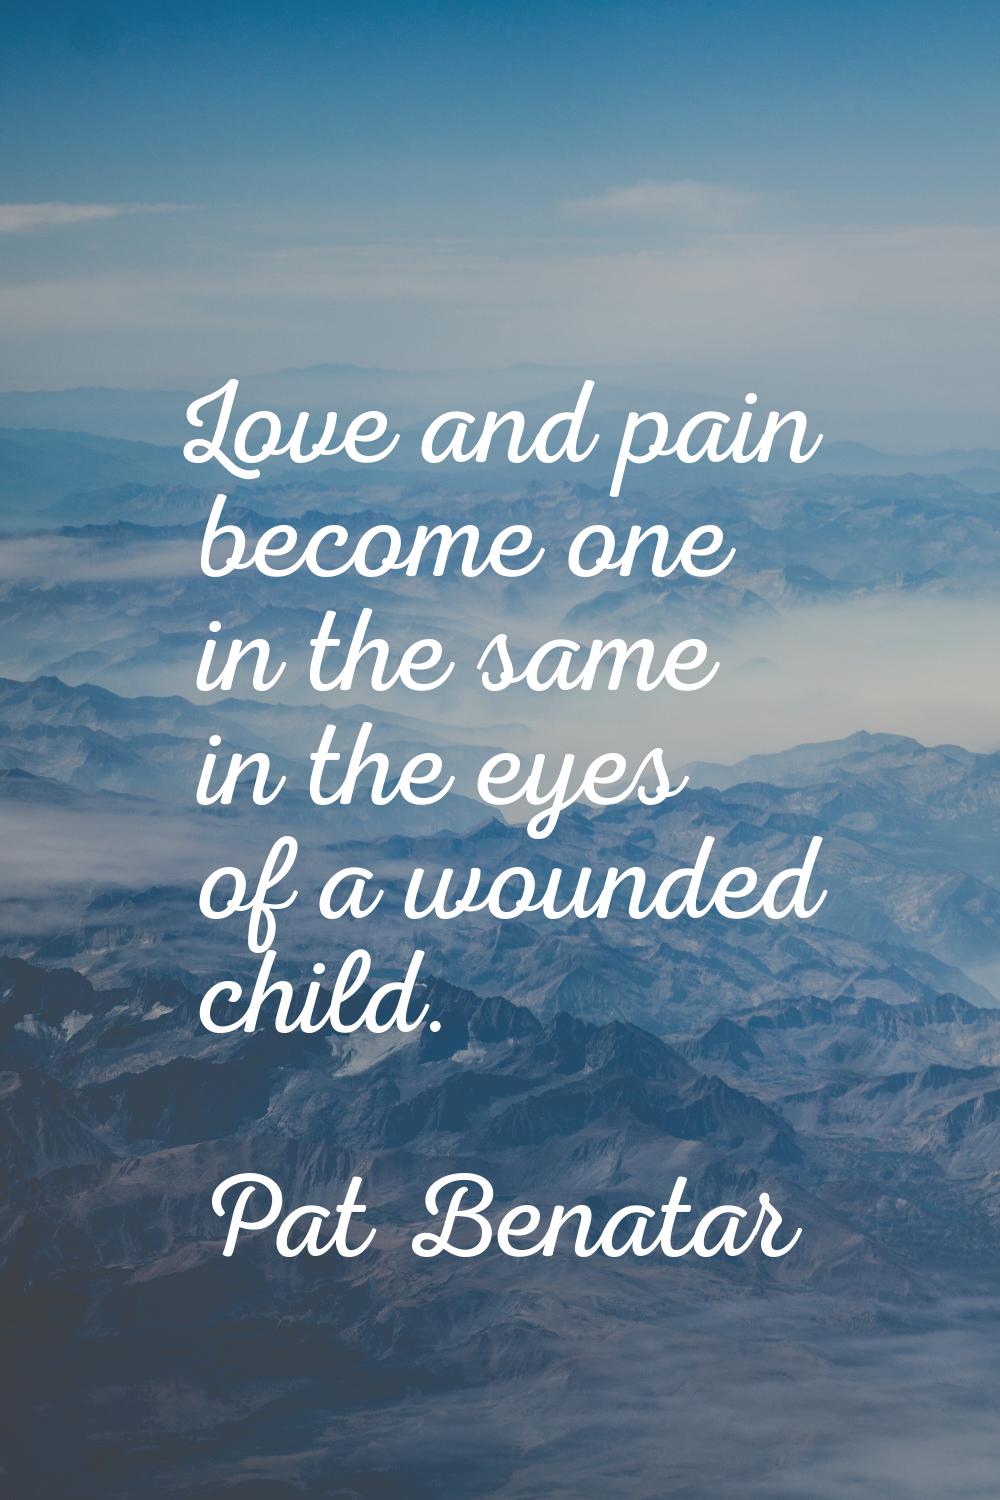 Love and pain become one in the same in the eyes of a wounded child.